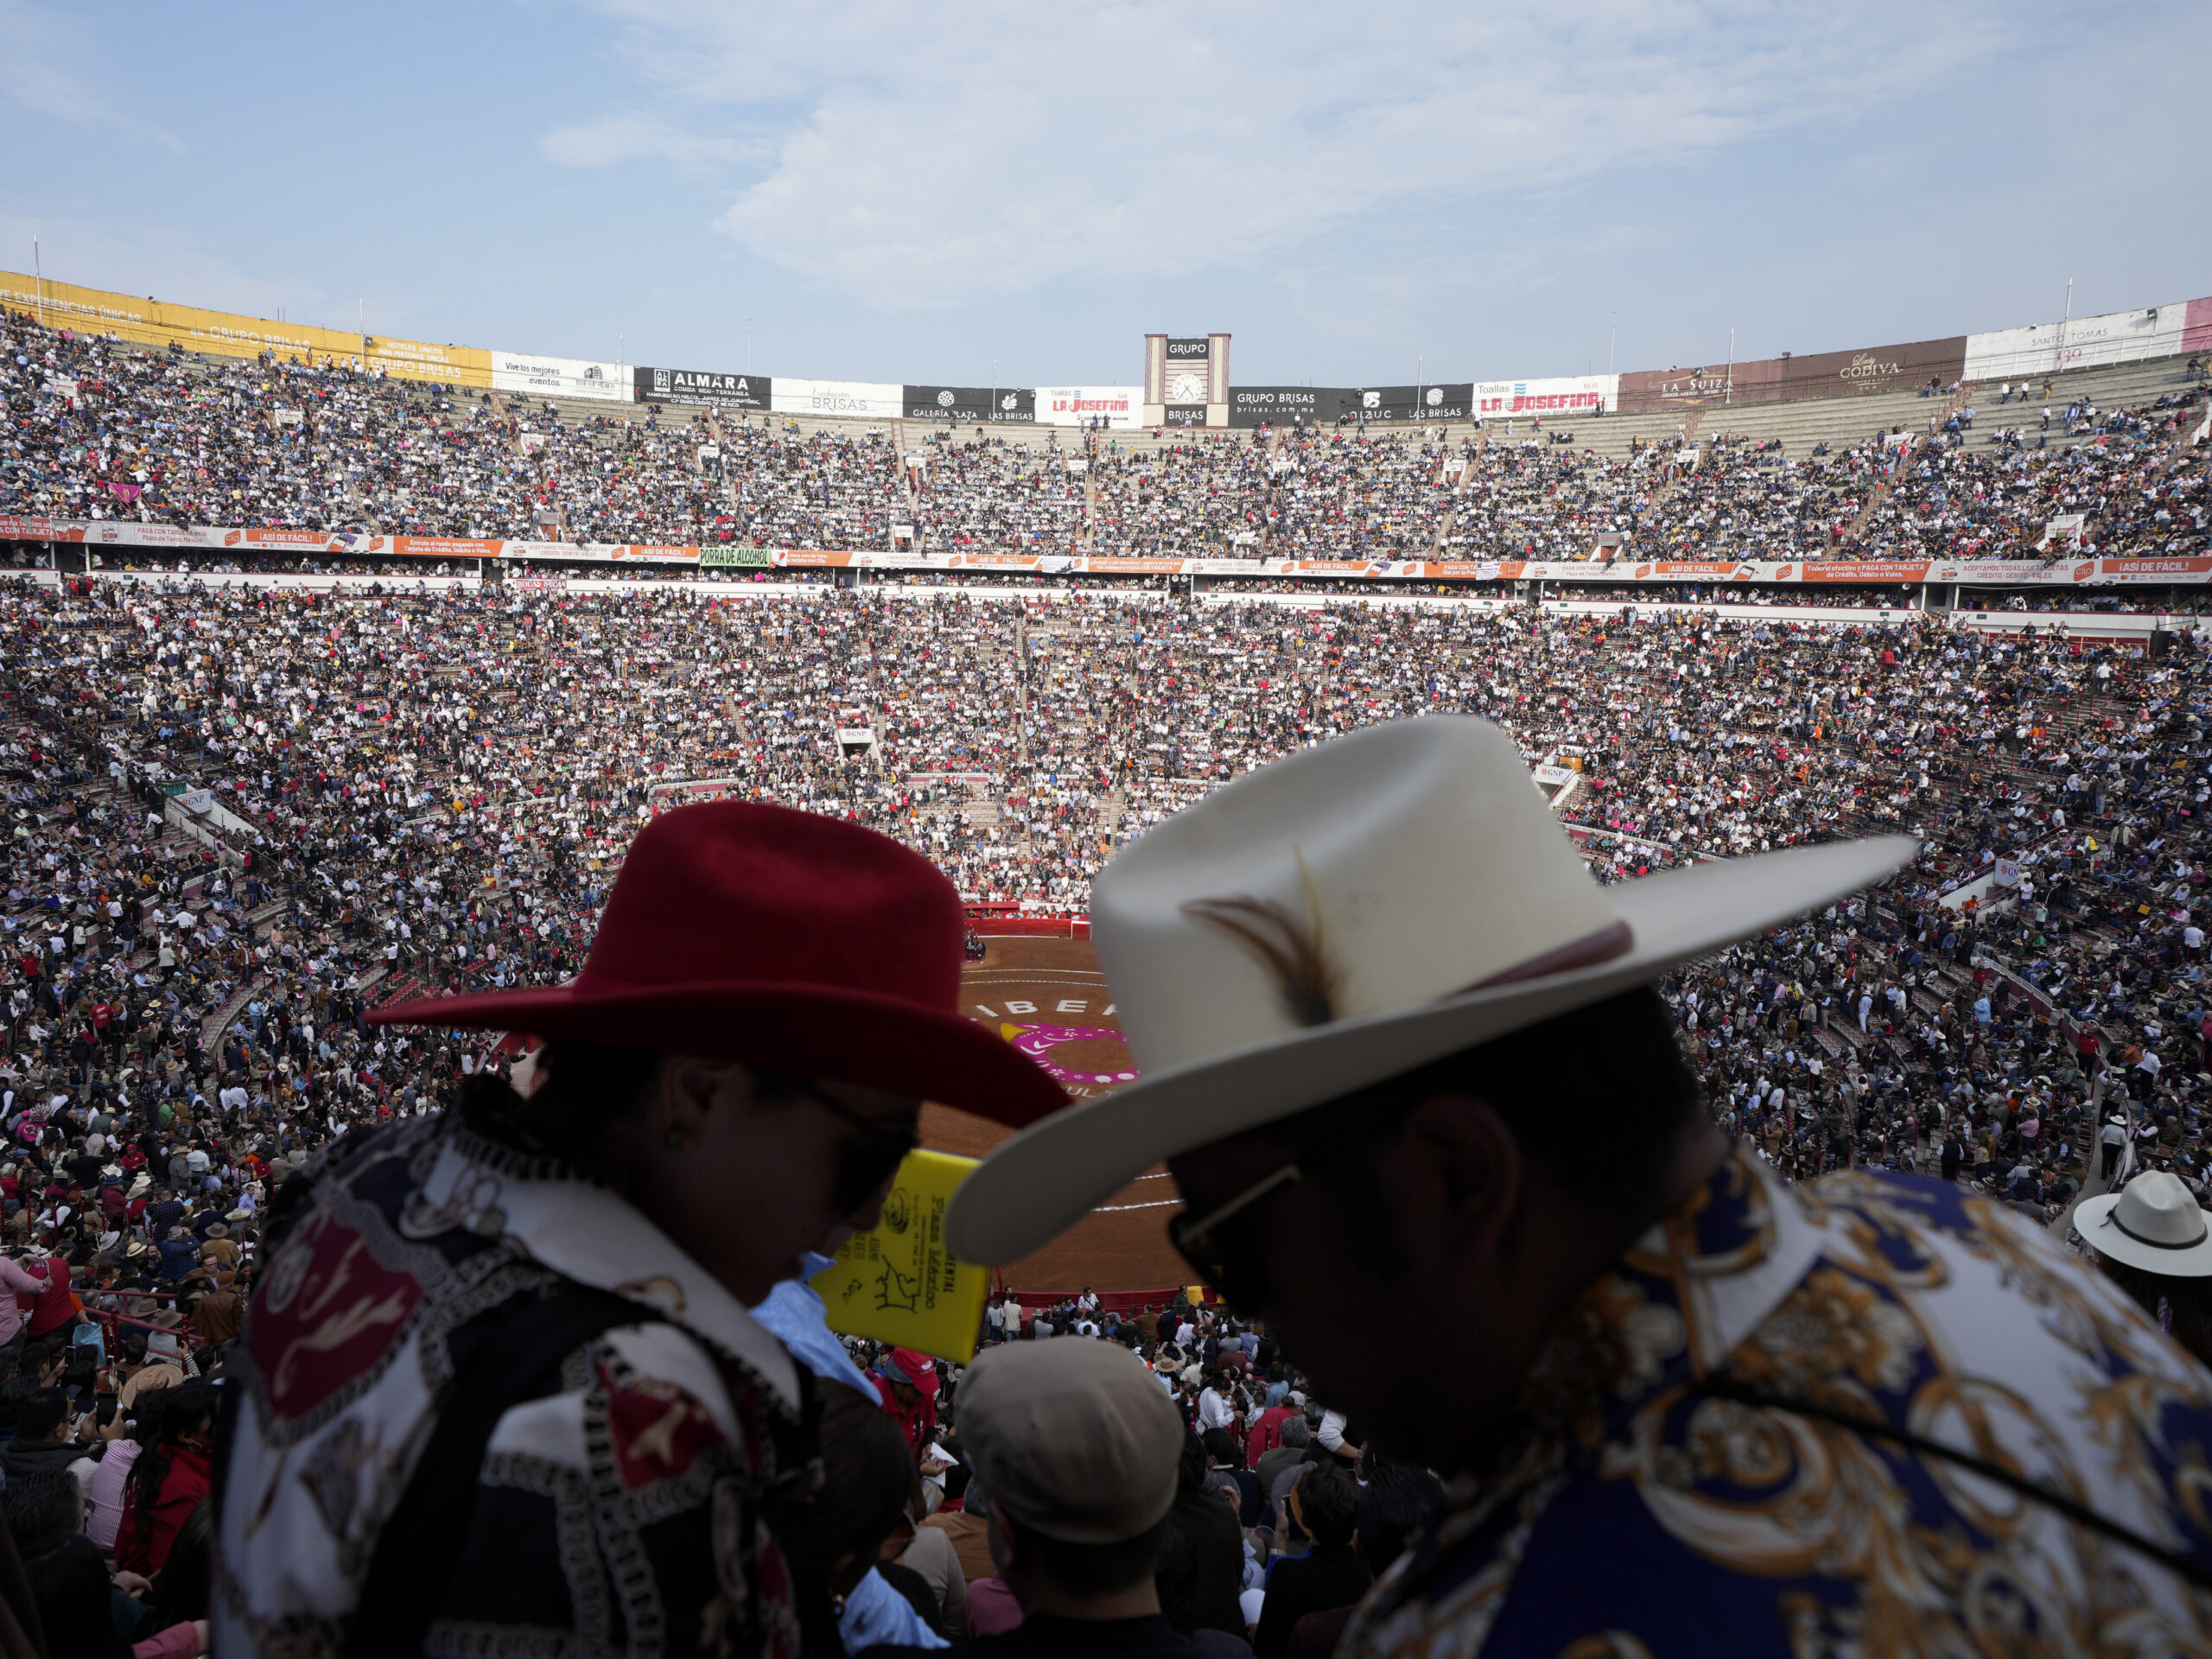 Mexico’s female matadors return to the world’s largest bullring